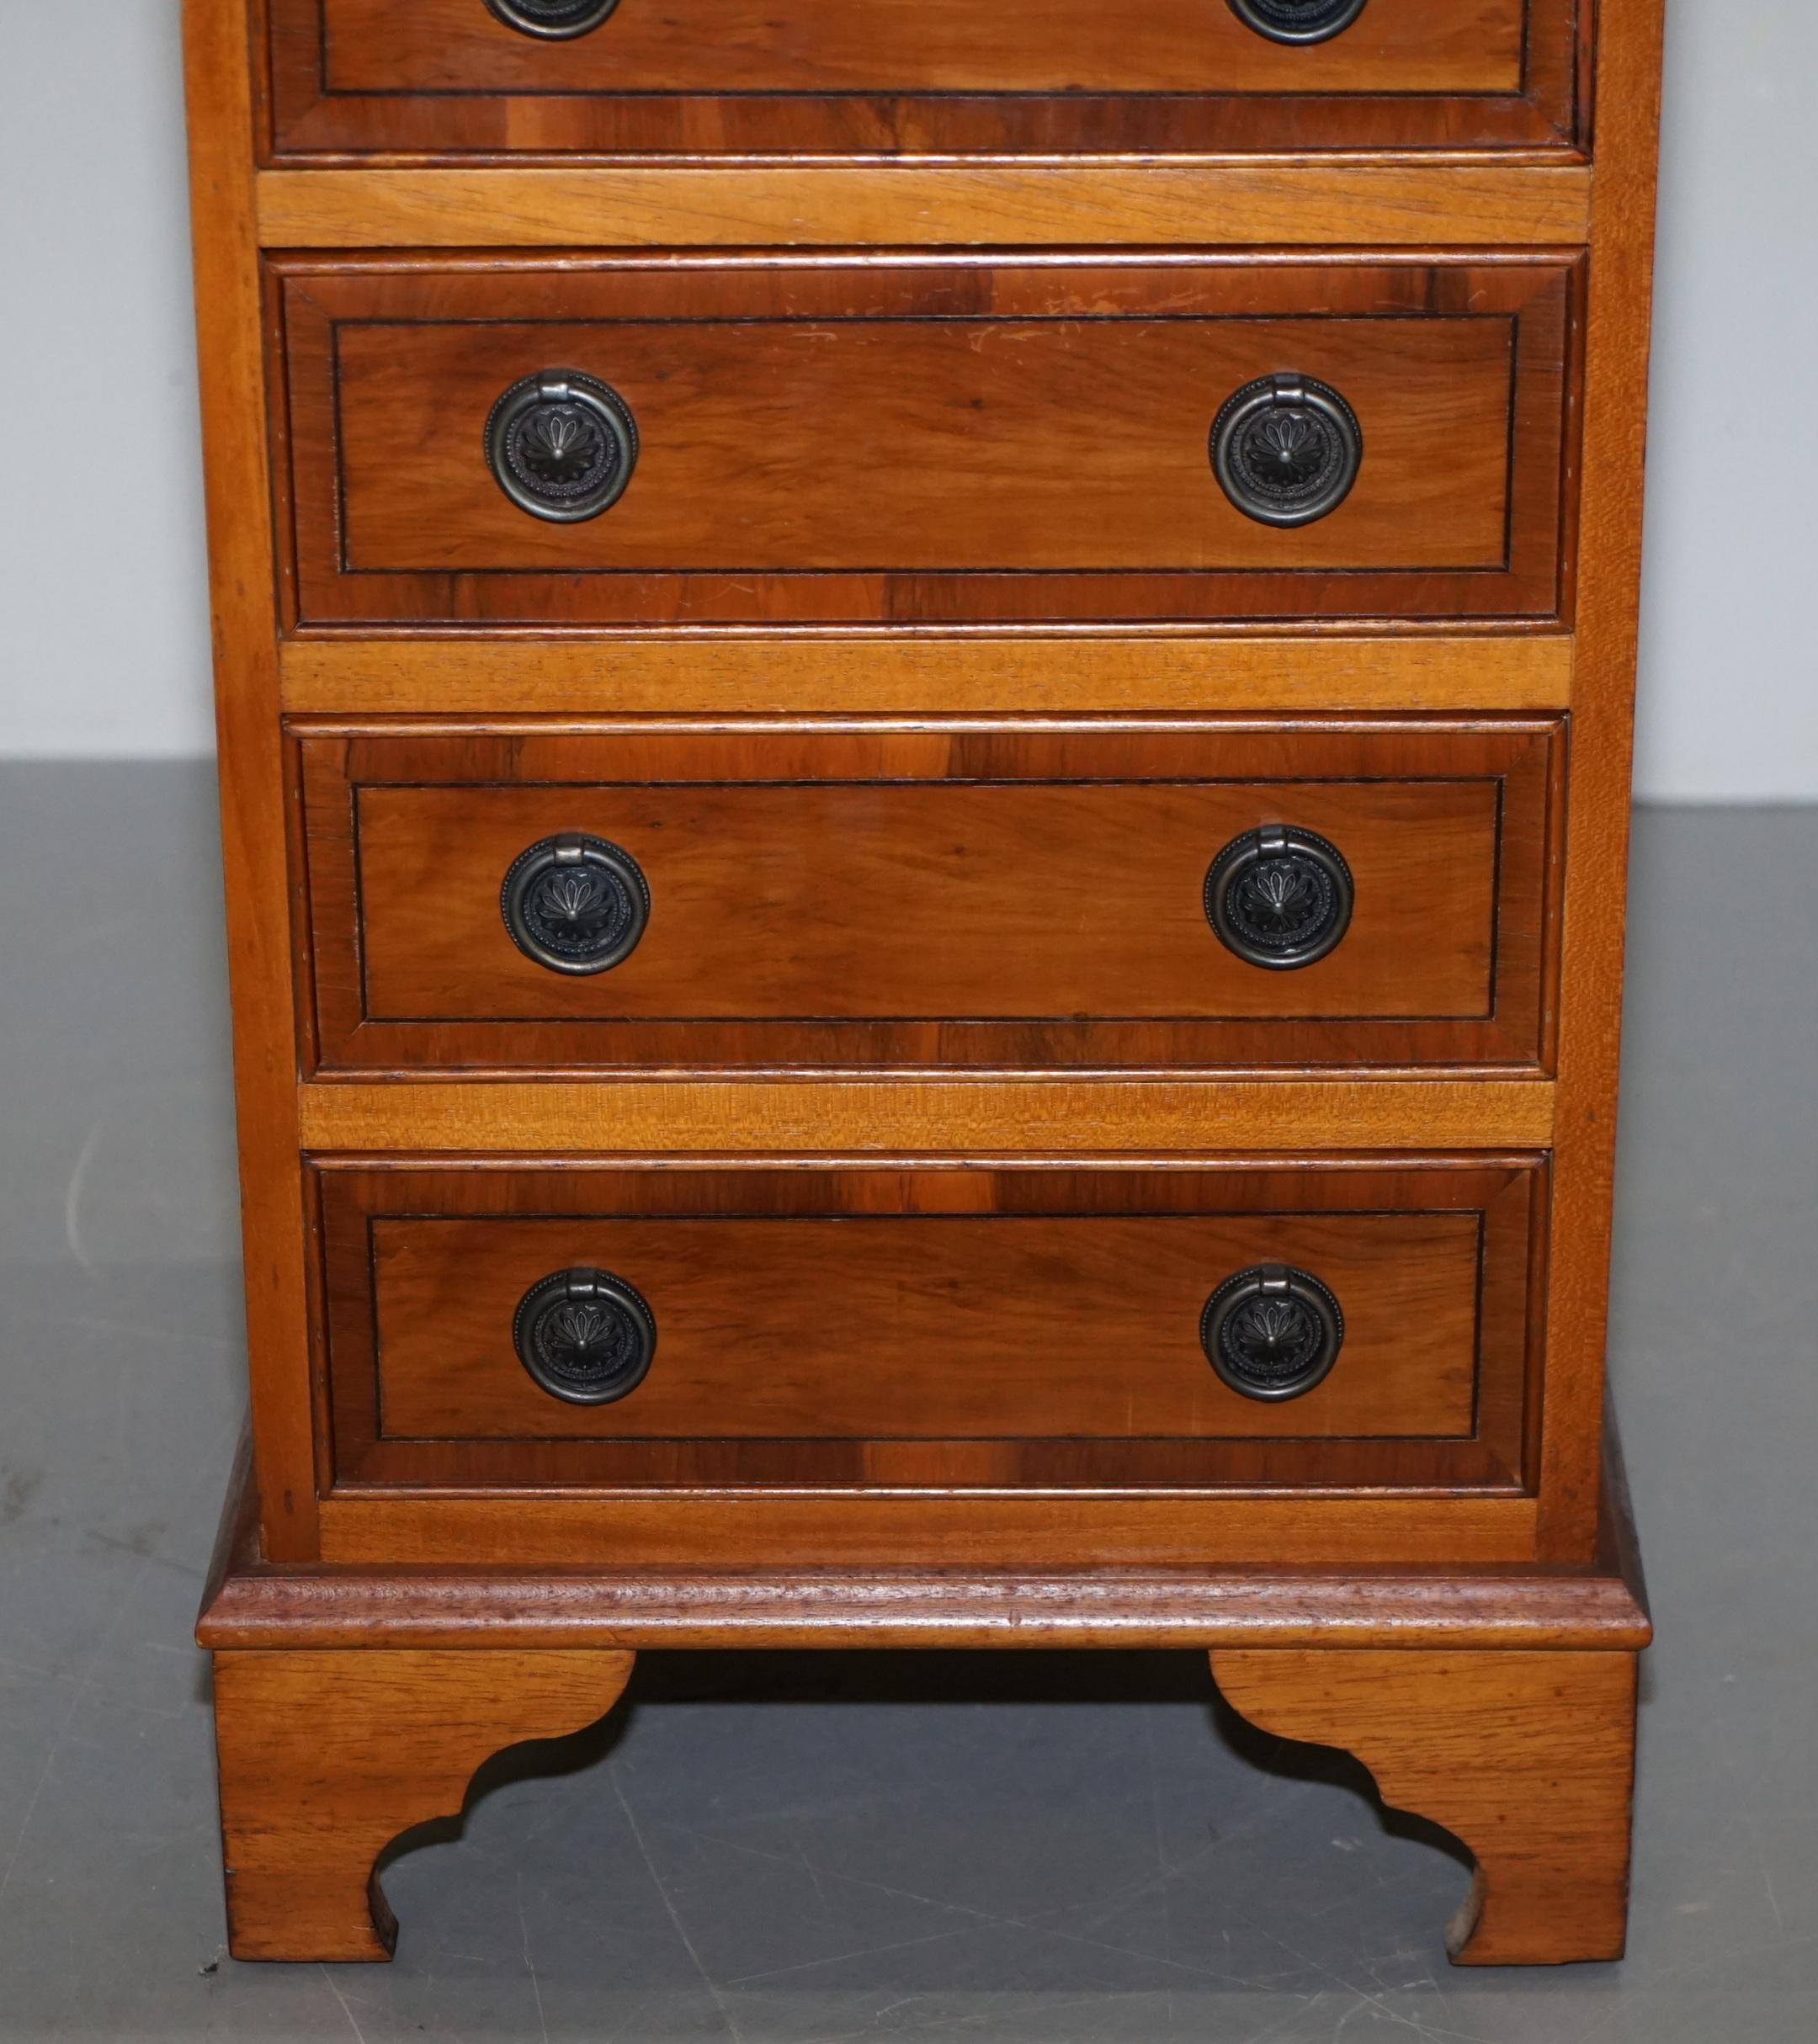 20th Century Lovely Burr Yew Wood Side Table Sized Chest of Drawers Georgian Style Very Fine